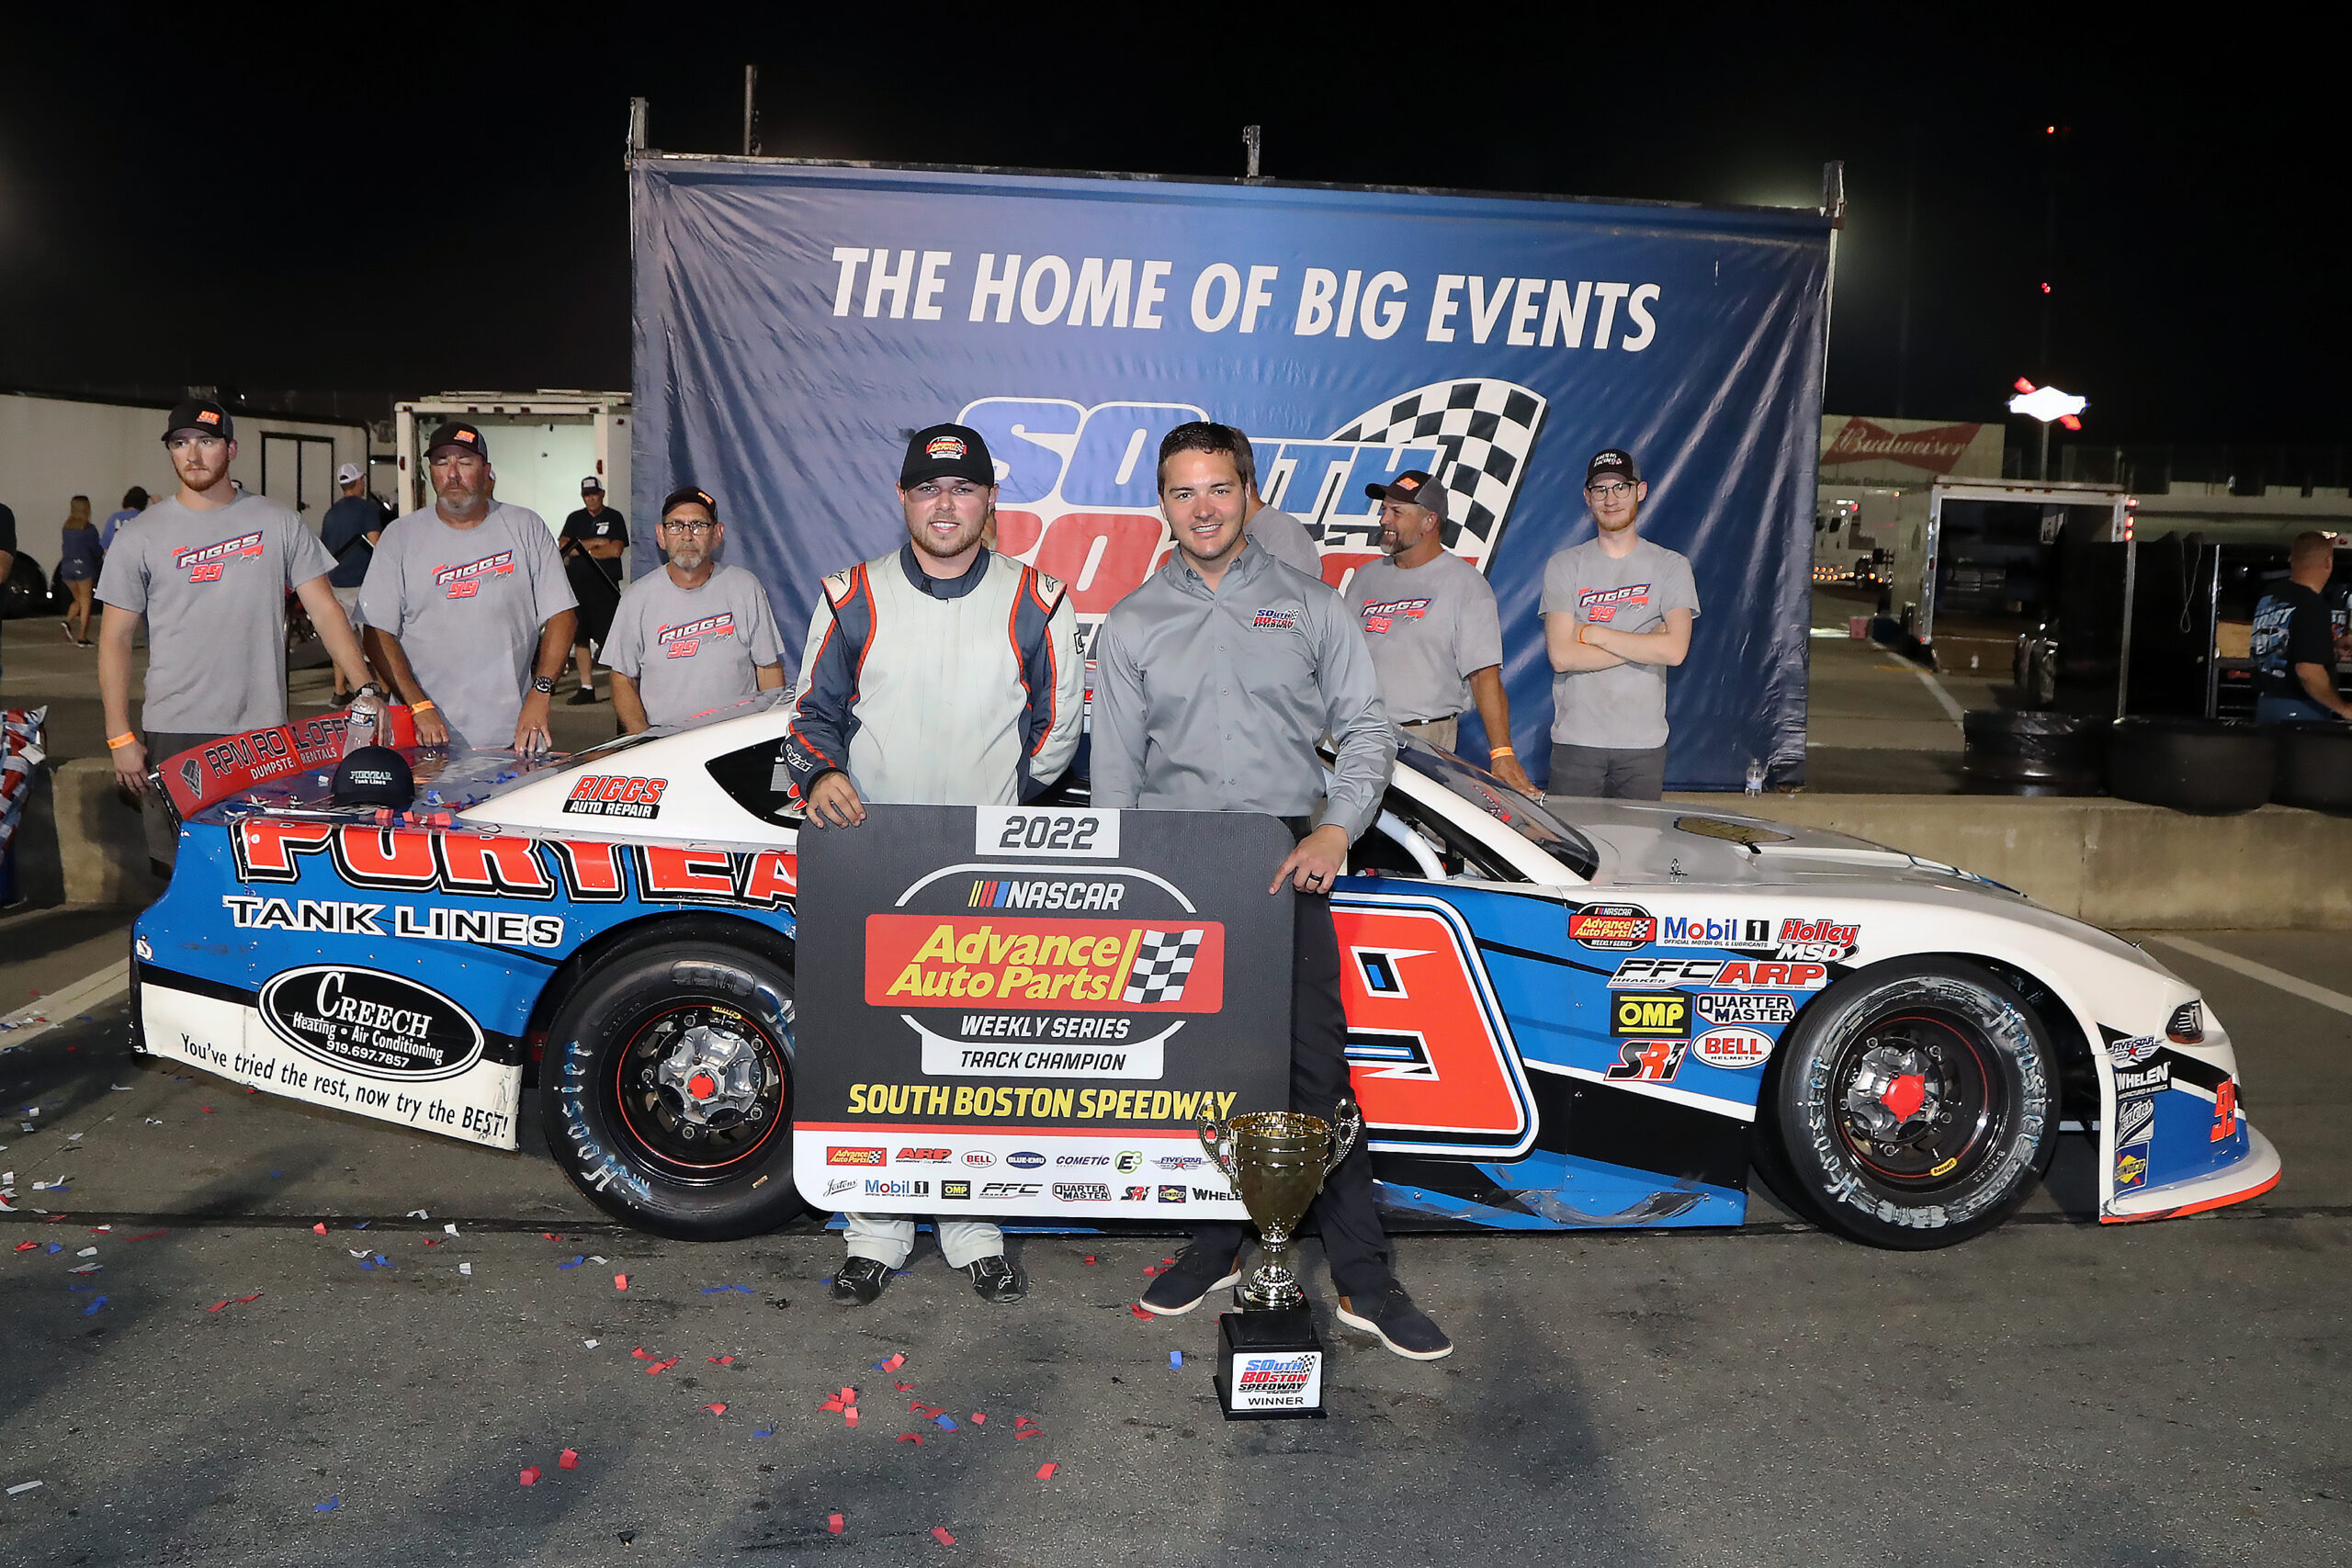 RIGGS WINS SOUTH BOSTON SPEEDWAY LATE MODEL TITLE; SELLERS SWEEPS BOTH RACES TO CLOSE THE GAP IN THE NATIONAL TITLE CHASE